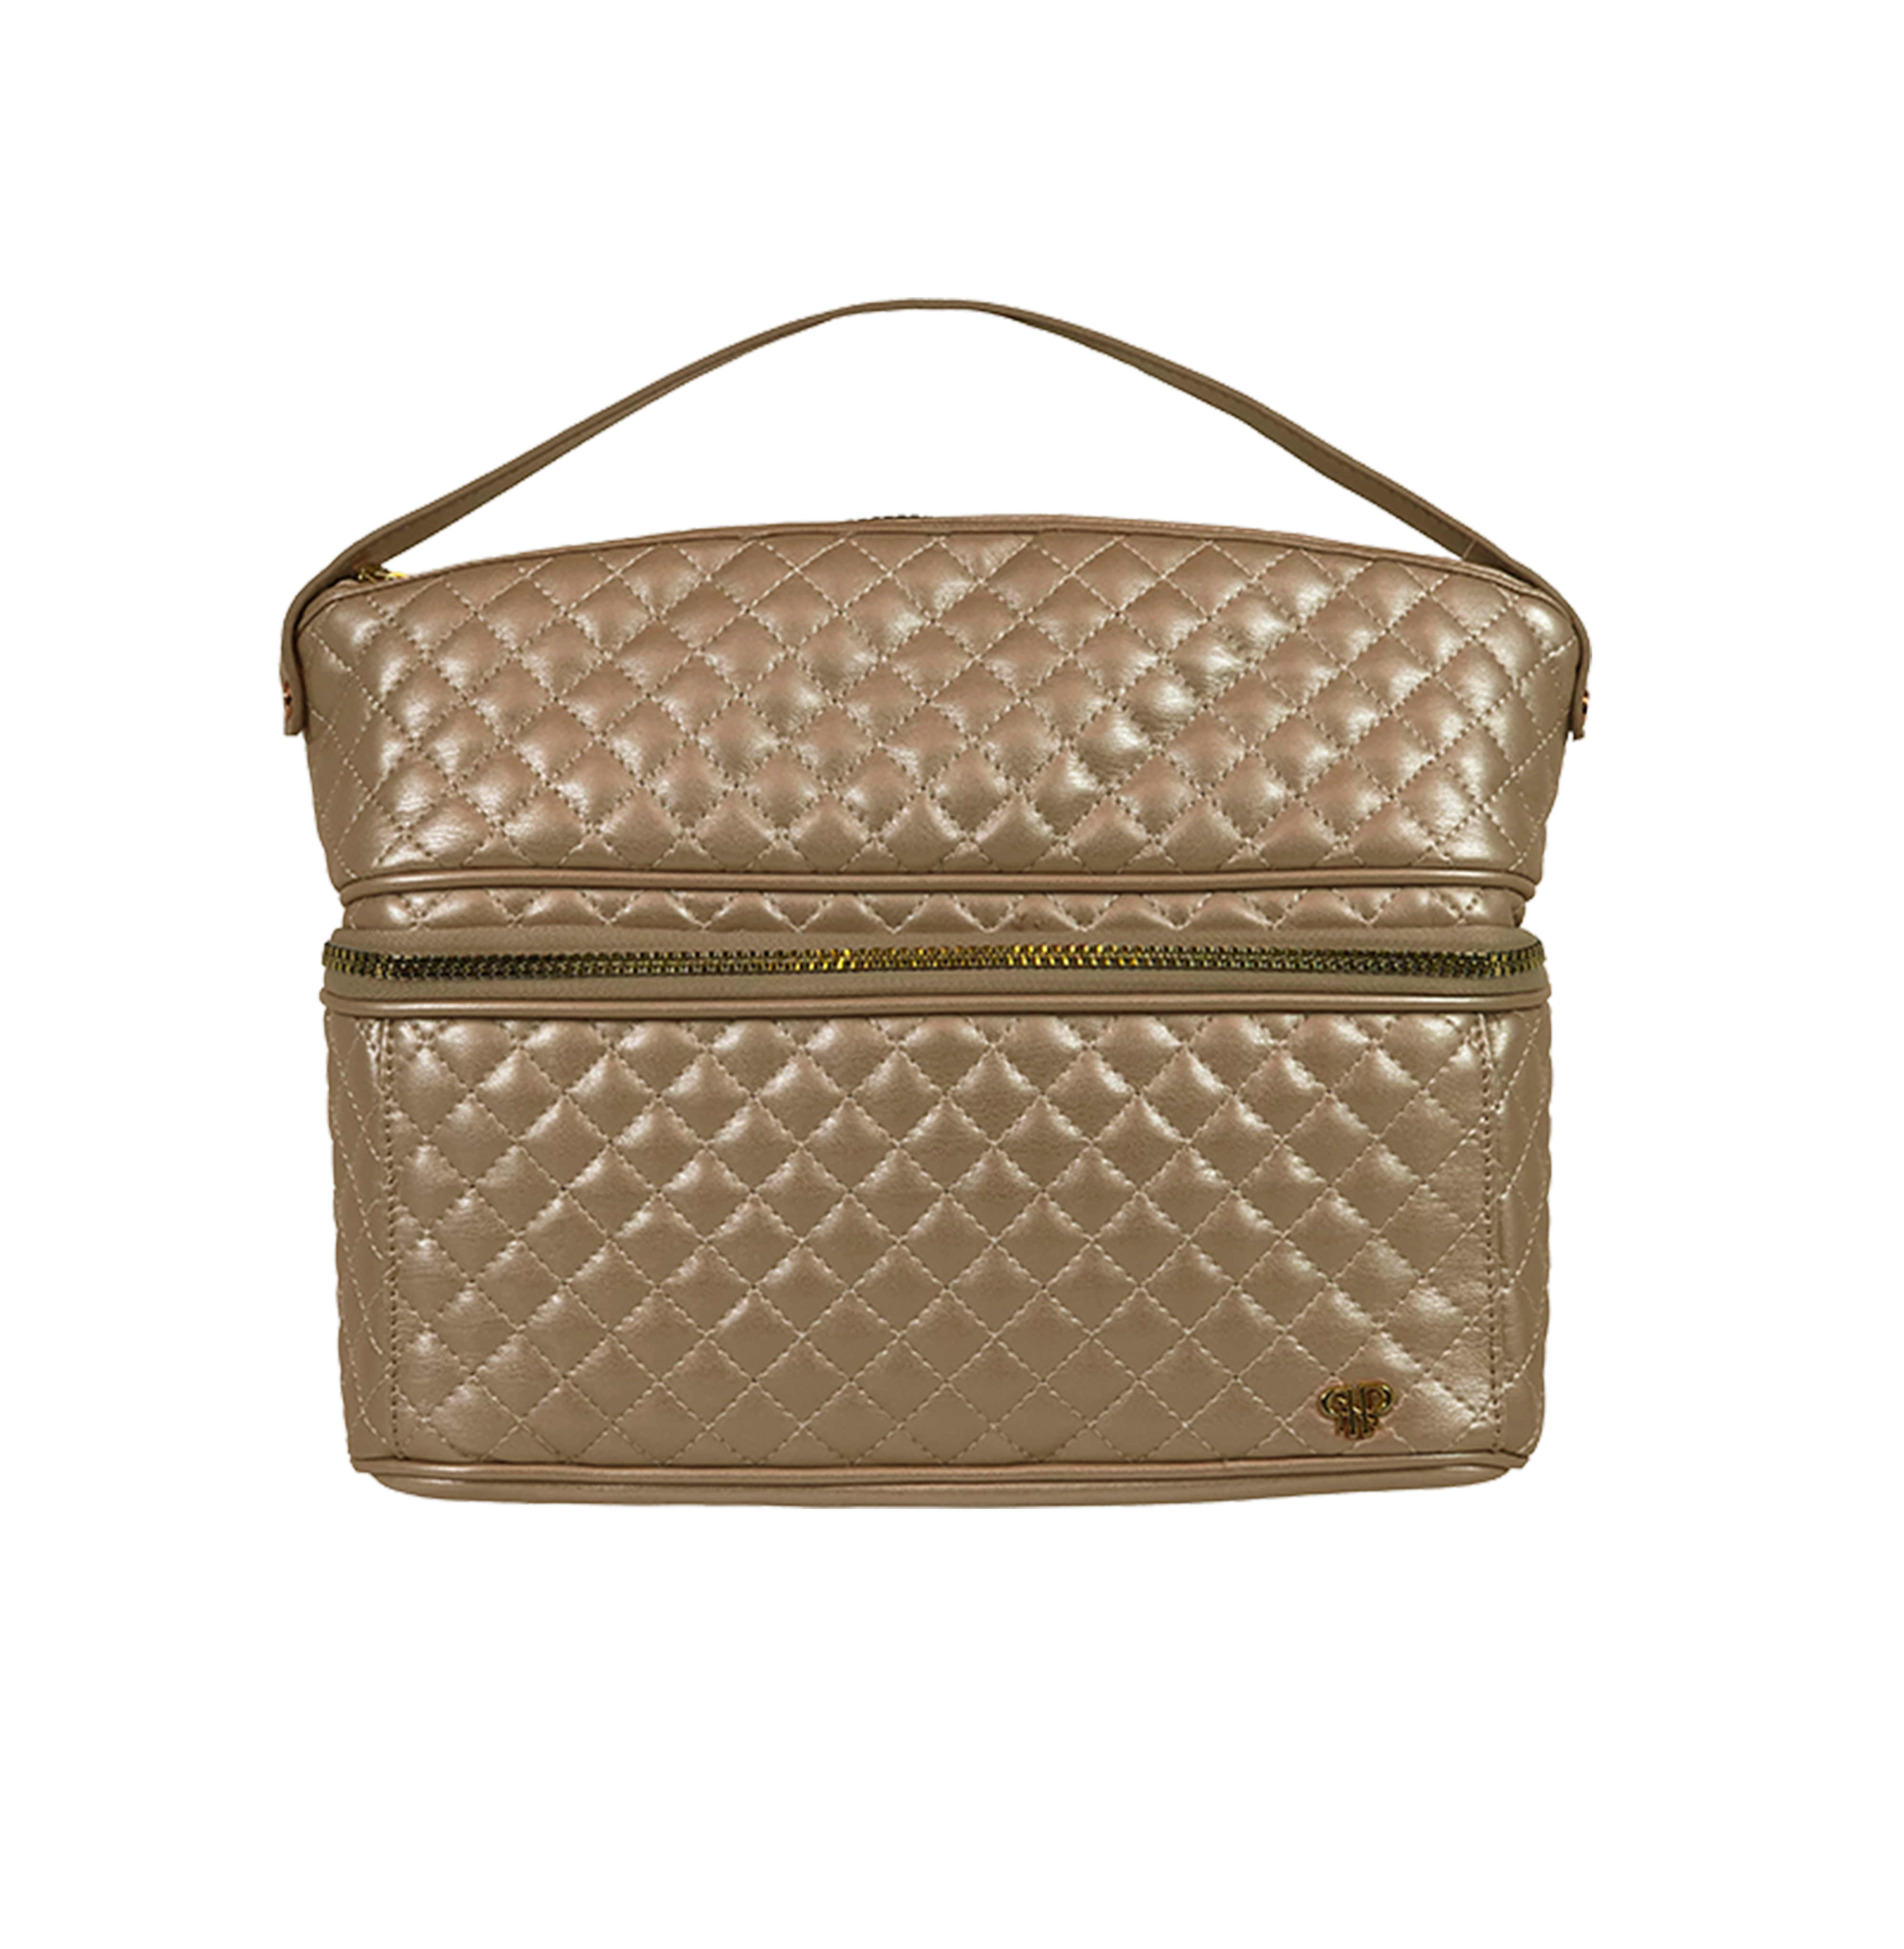 Pursen Stylist Travel Bag - Gold Quilted